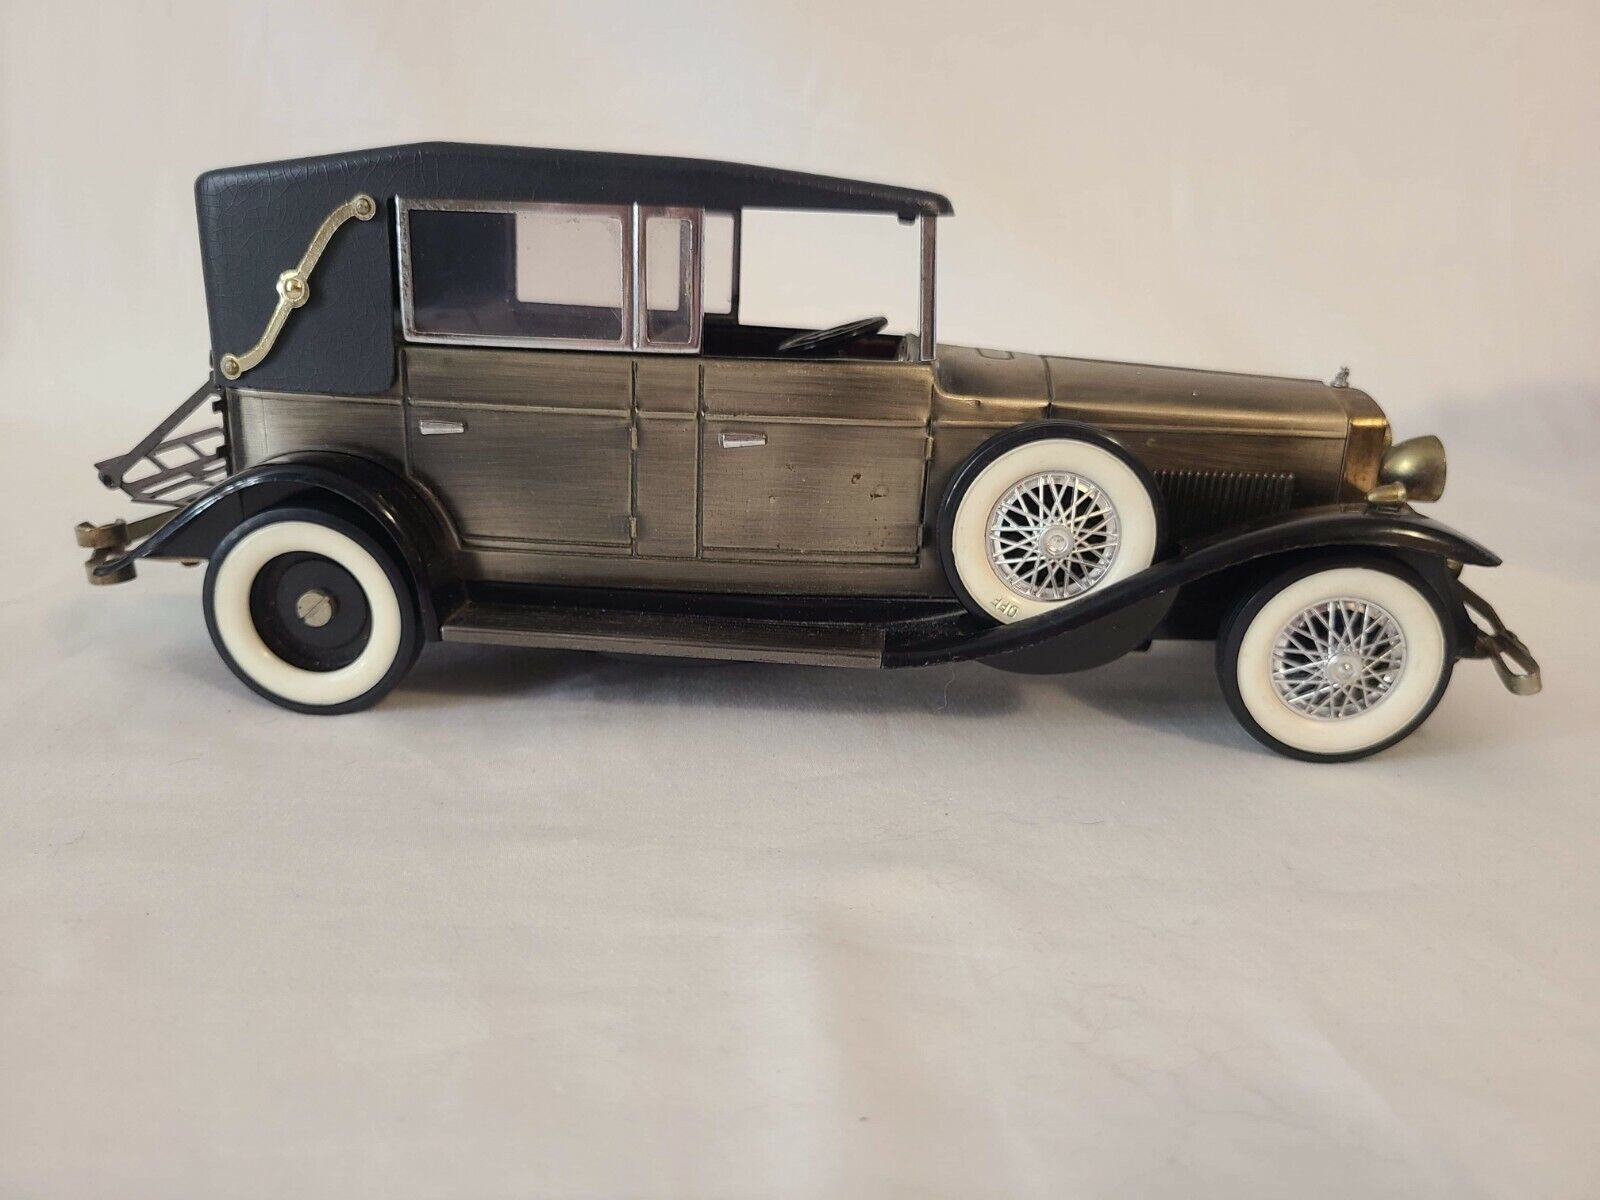 Vintage Solid State AM Radio Lincoln 1928 Model L Convertible Car 